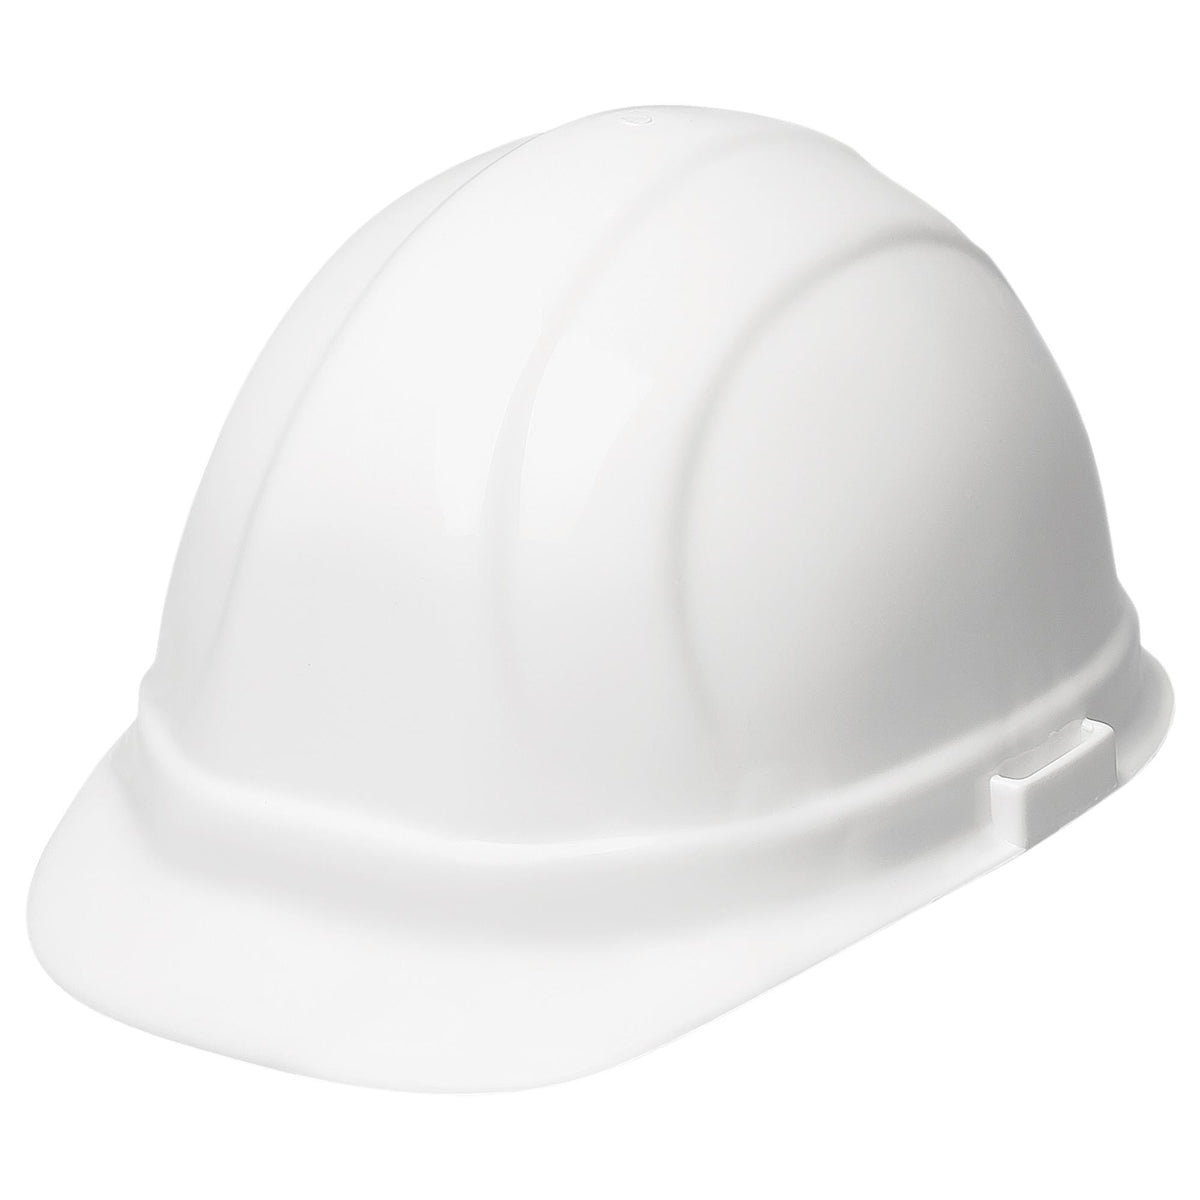 Omega II® Cap with Accessory Slots and 6-Point